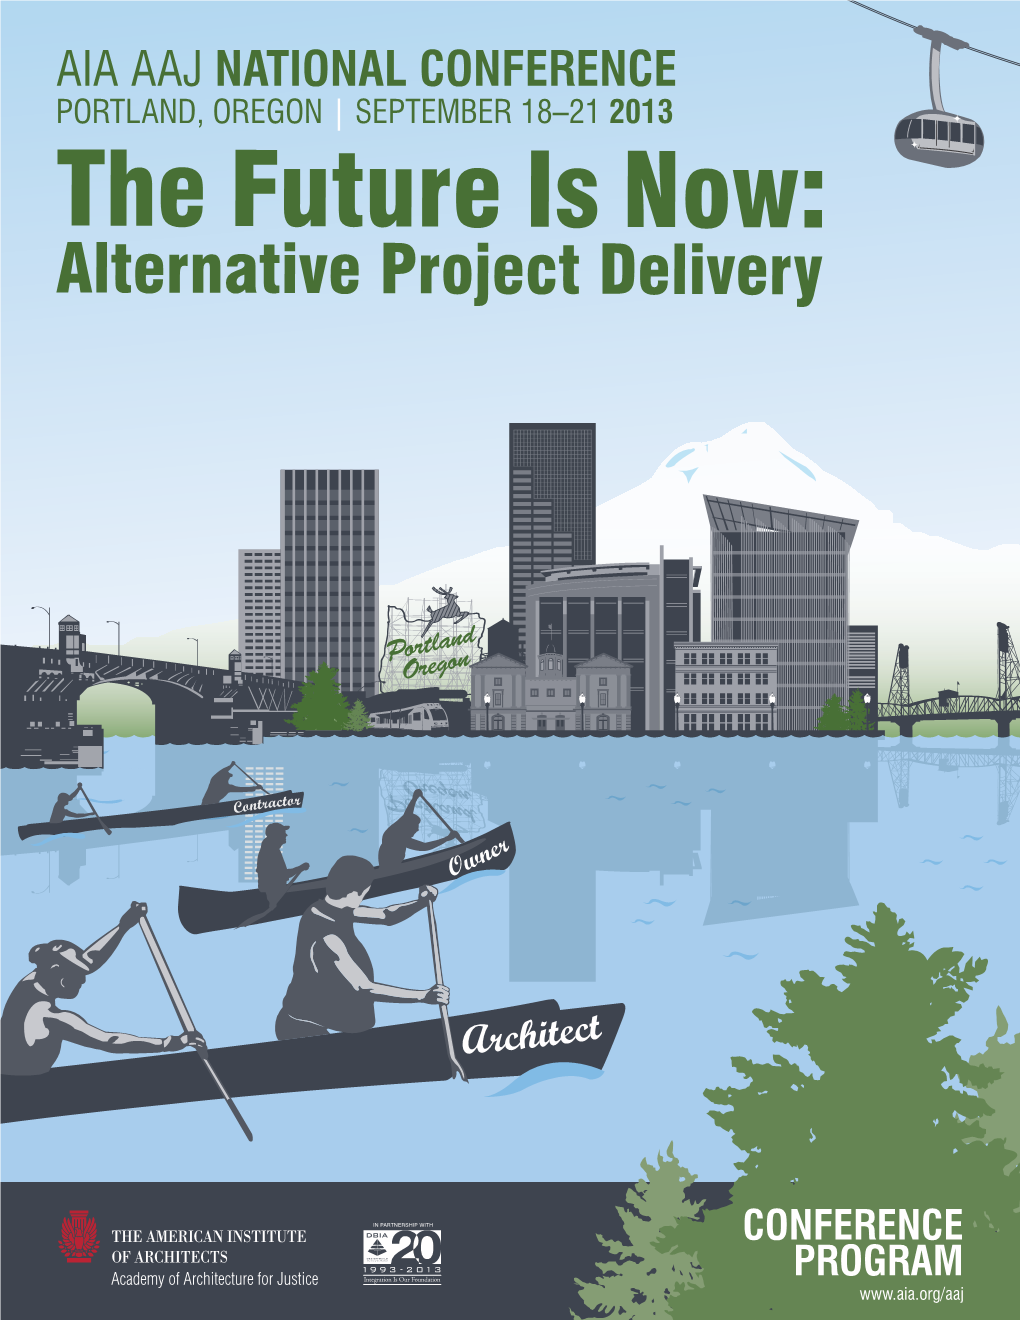 The Future Is Now: Alternative Project Delivery